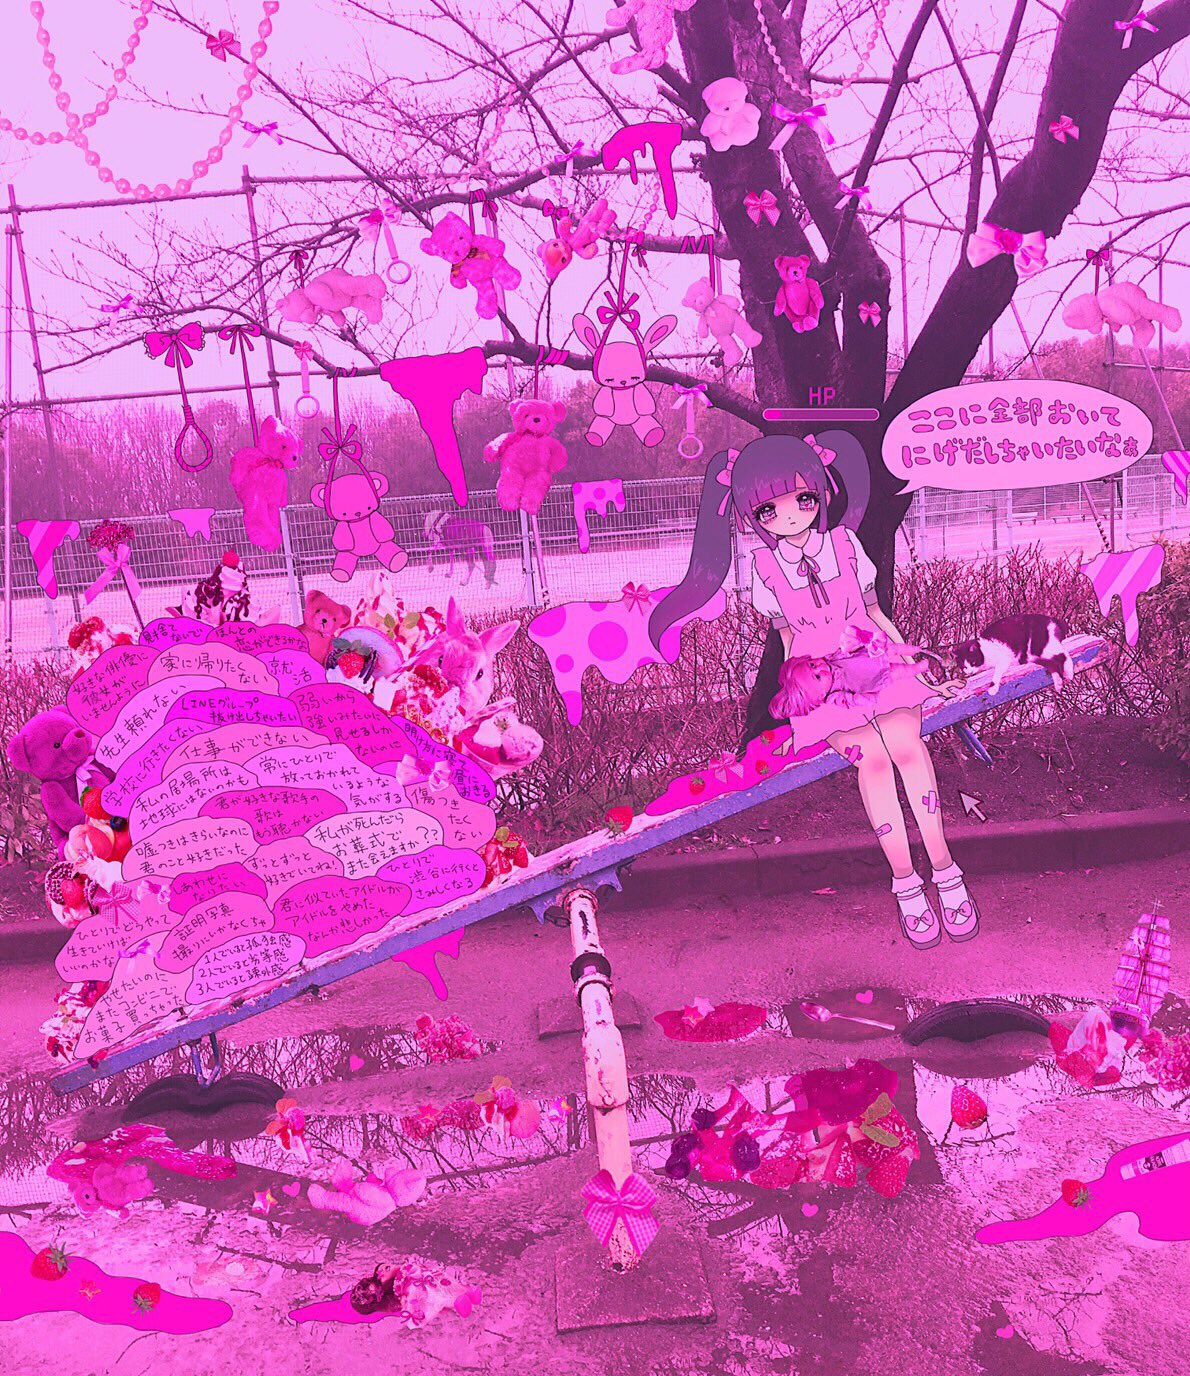 Yamikawaii Aesthetics Wiki Fandom Find and save images from the anime aesthetics collection by 〈seve〉 (_shiil) on we heart it, your everyday app to get lost in what you love. yamikawaii aesthetics wiki fandom